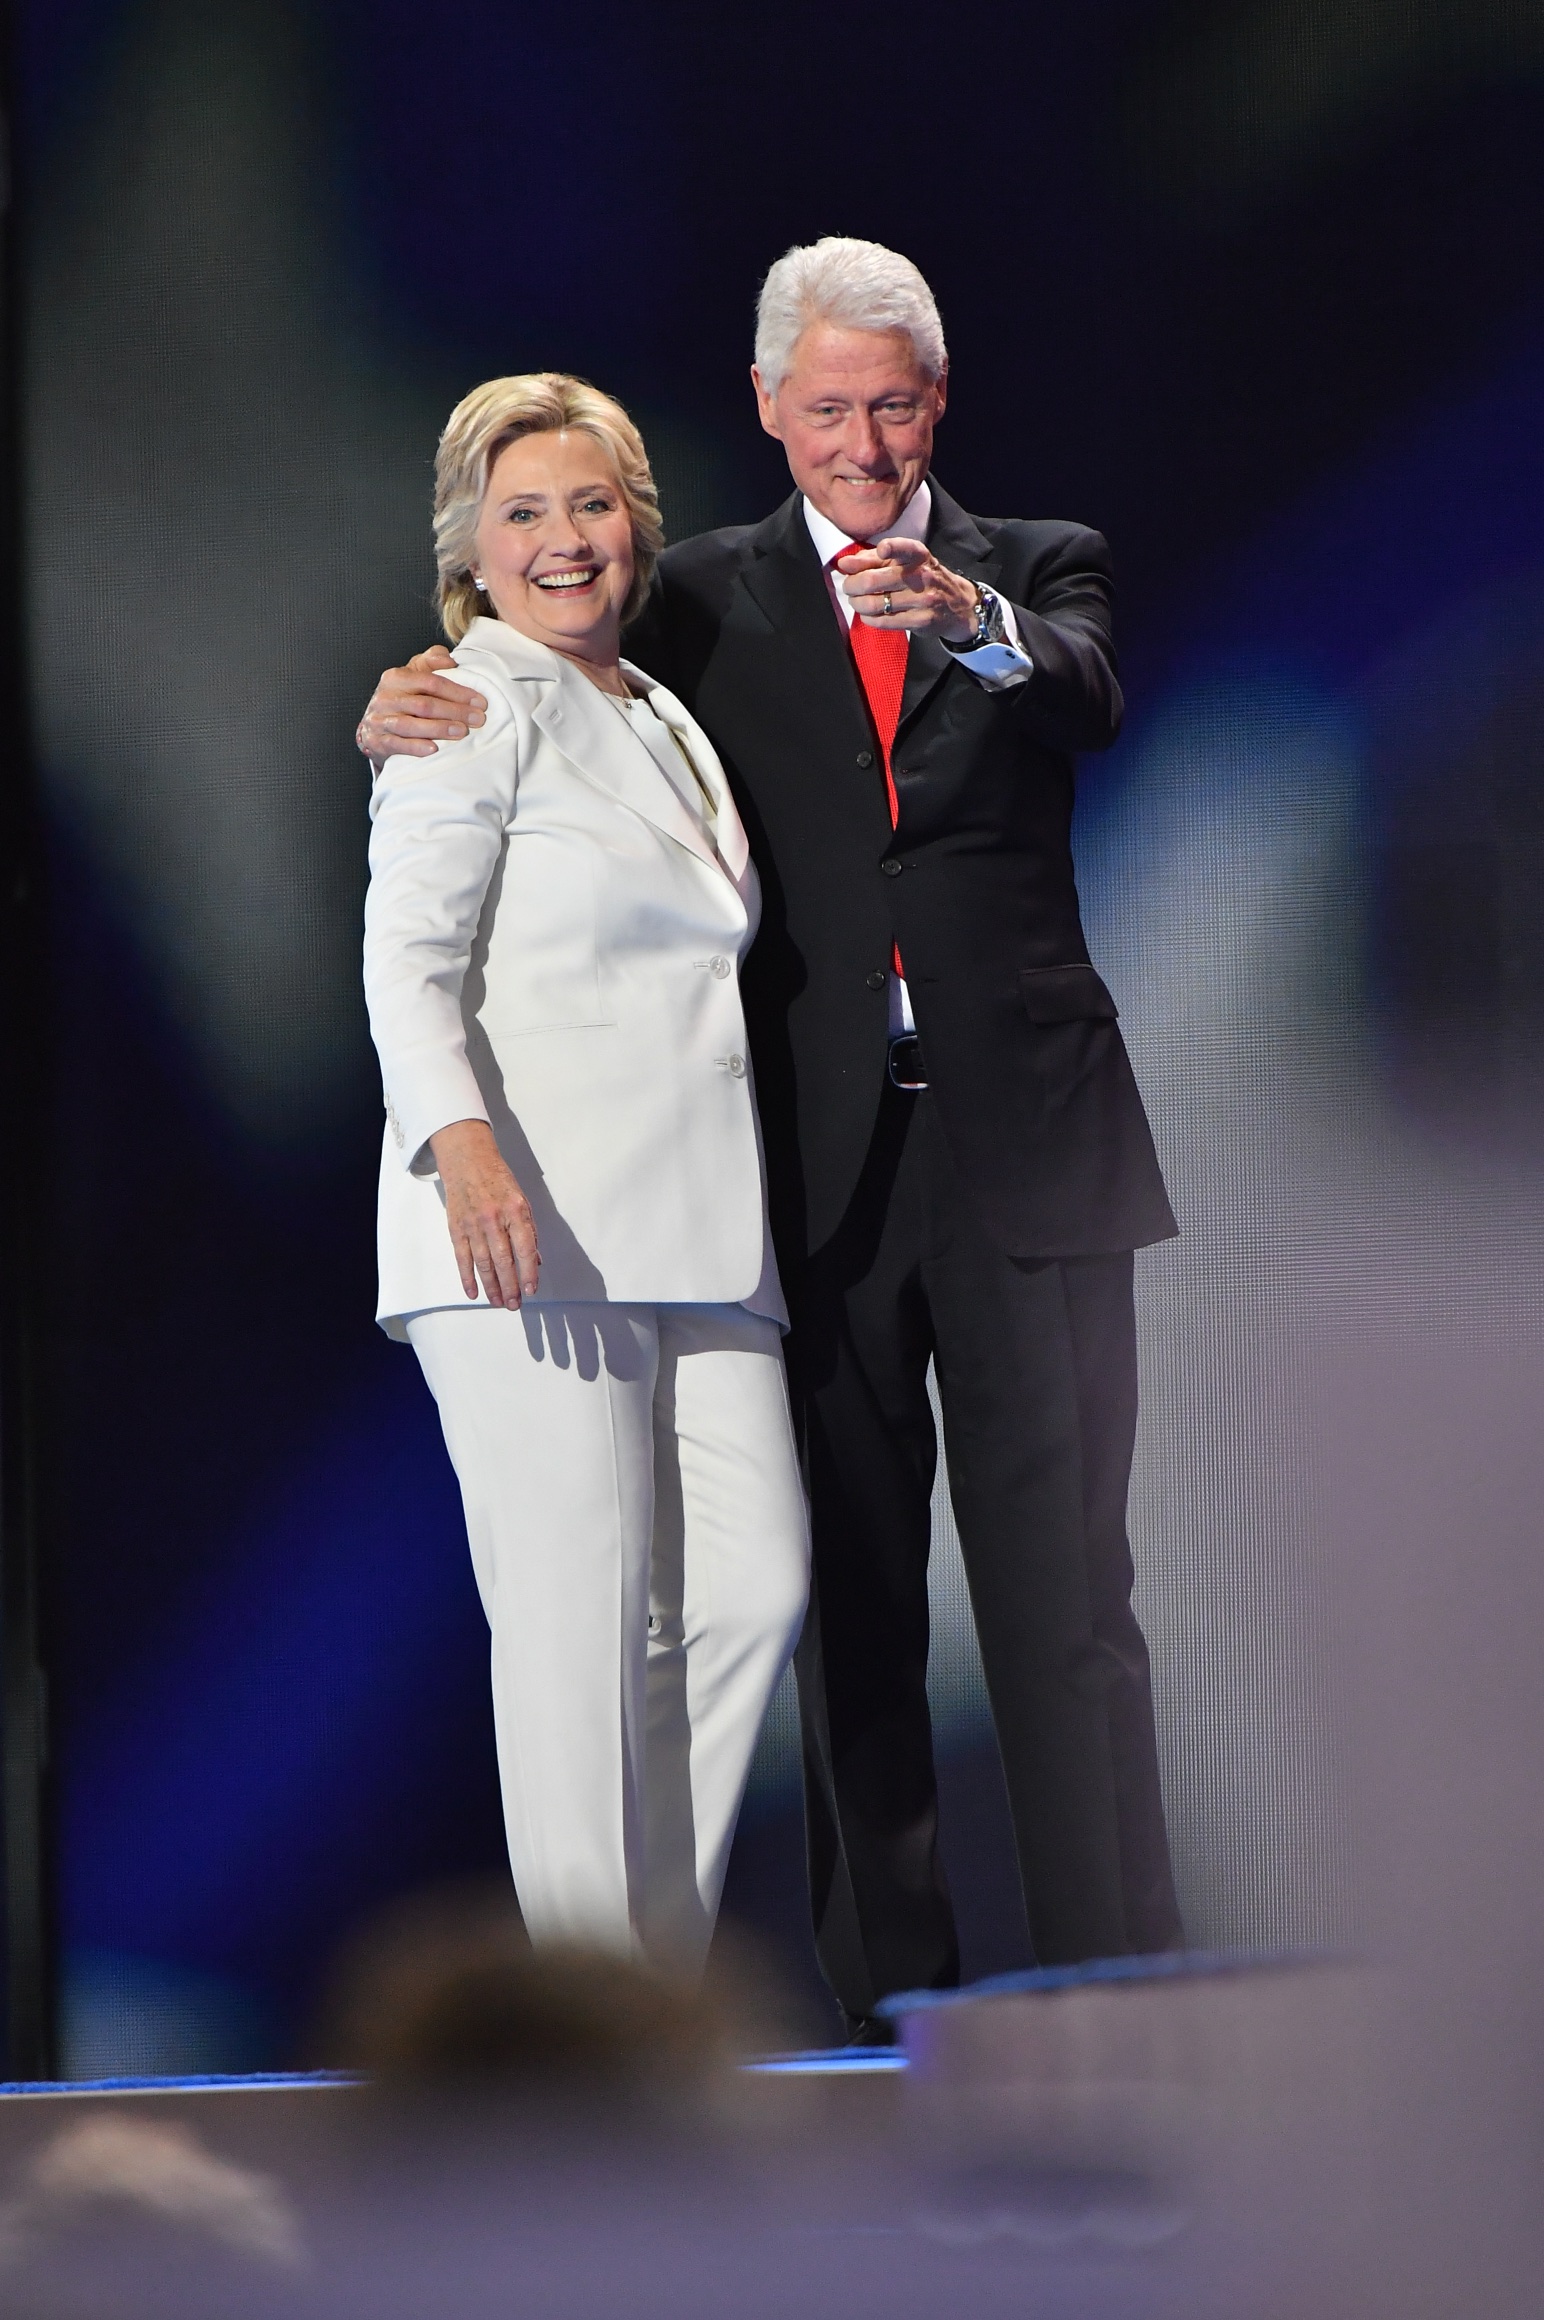 PHOTO: Hillary Clinton and Bill Clinton look over the crowd of delegates at the 2016 Democratic National Convention-Day 4 at Wells Fargo Center, July 27, 2016, in Philadelphia, Penn.  